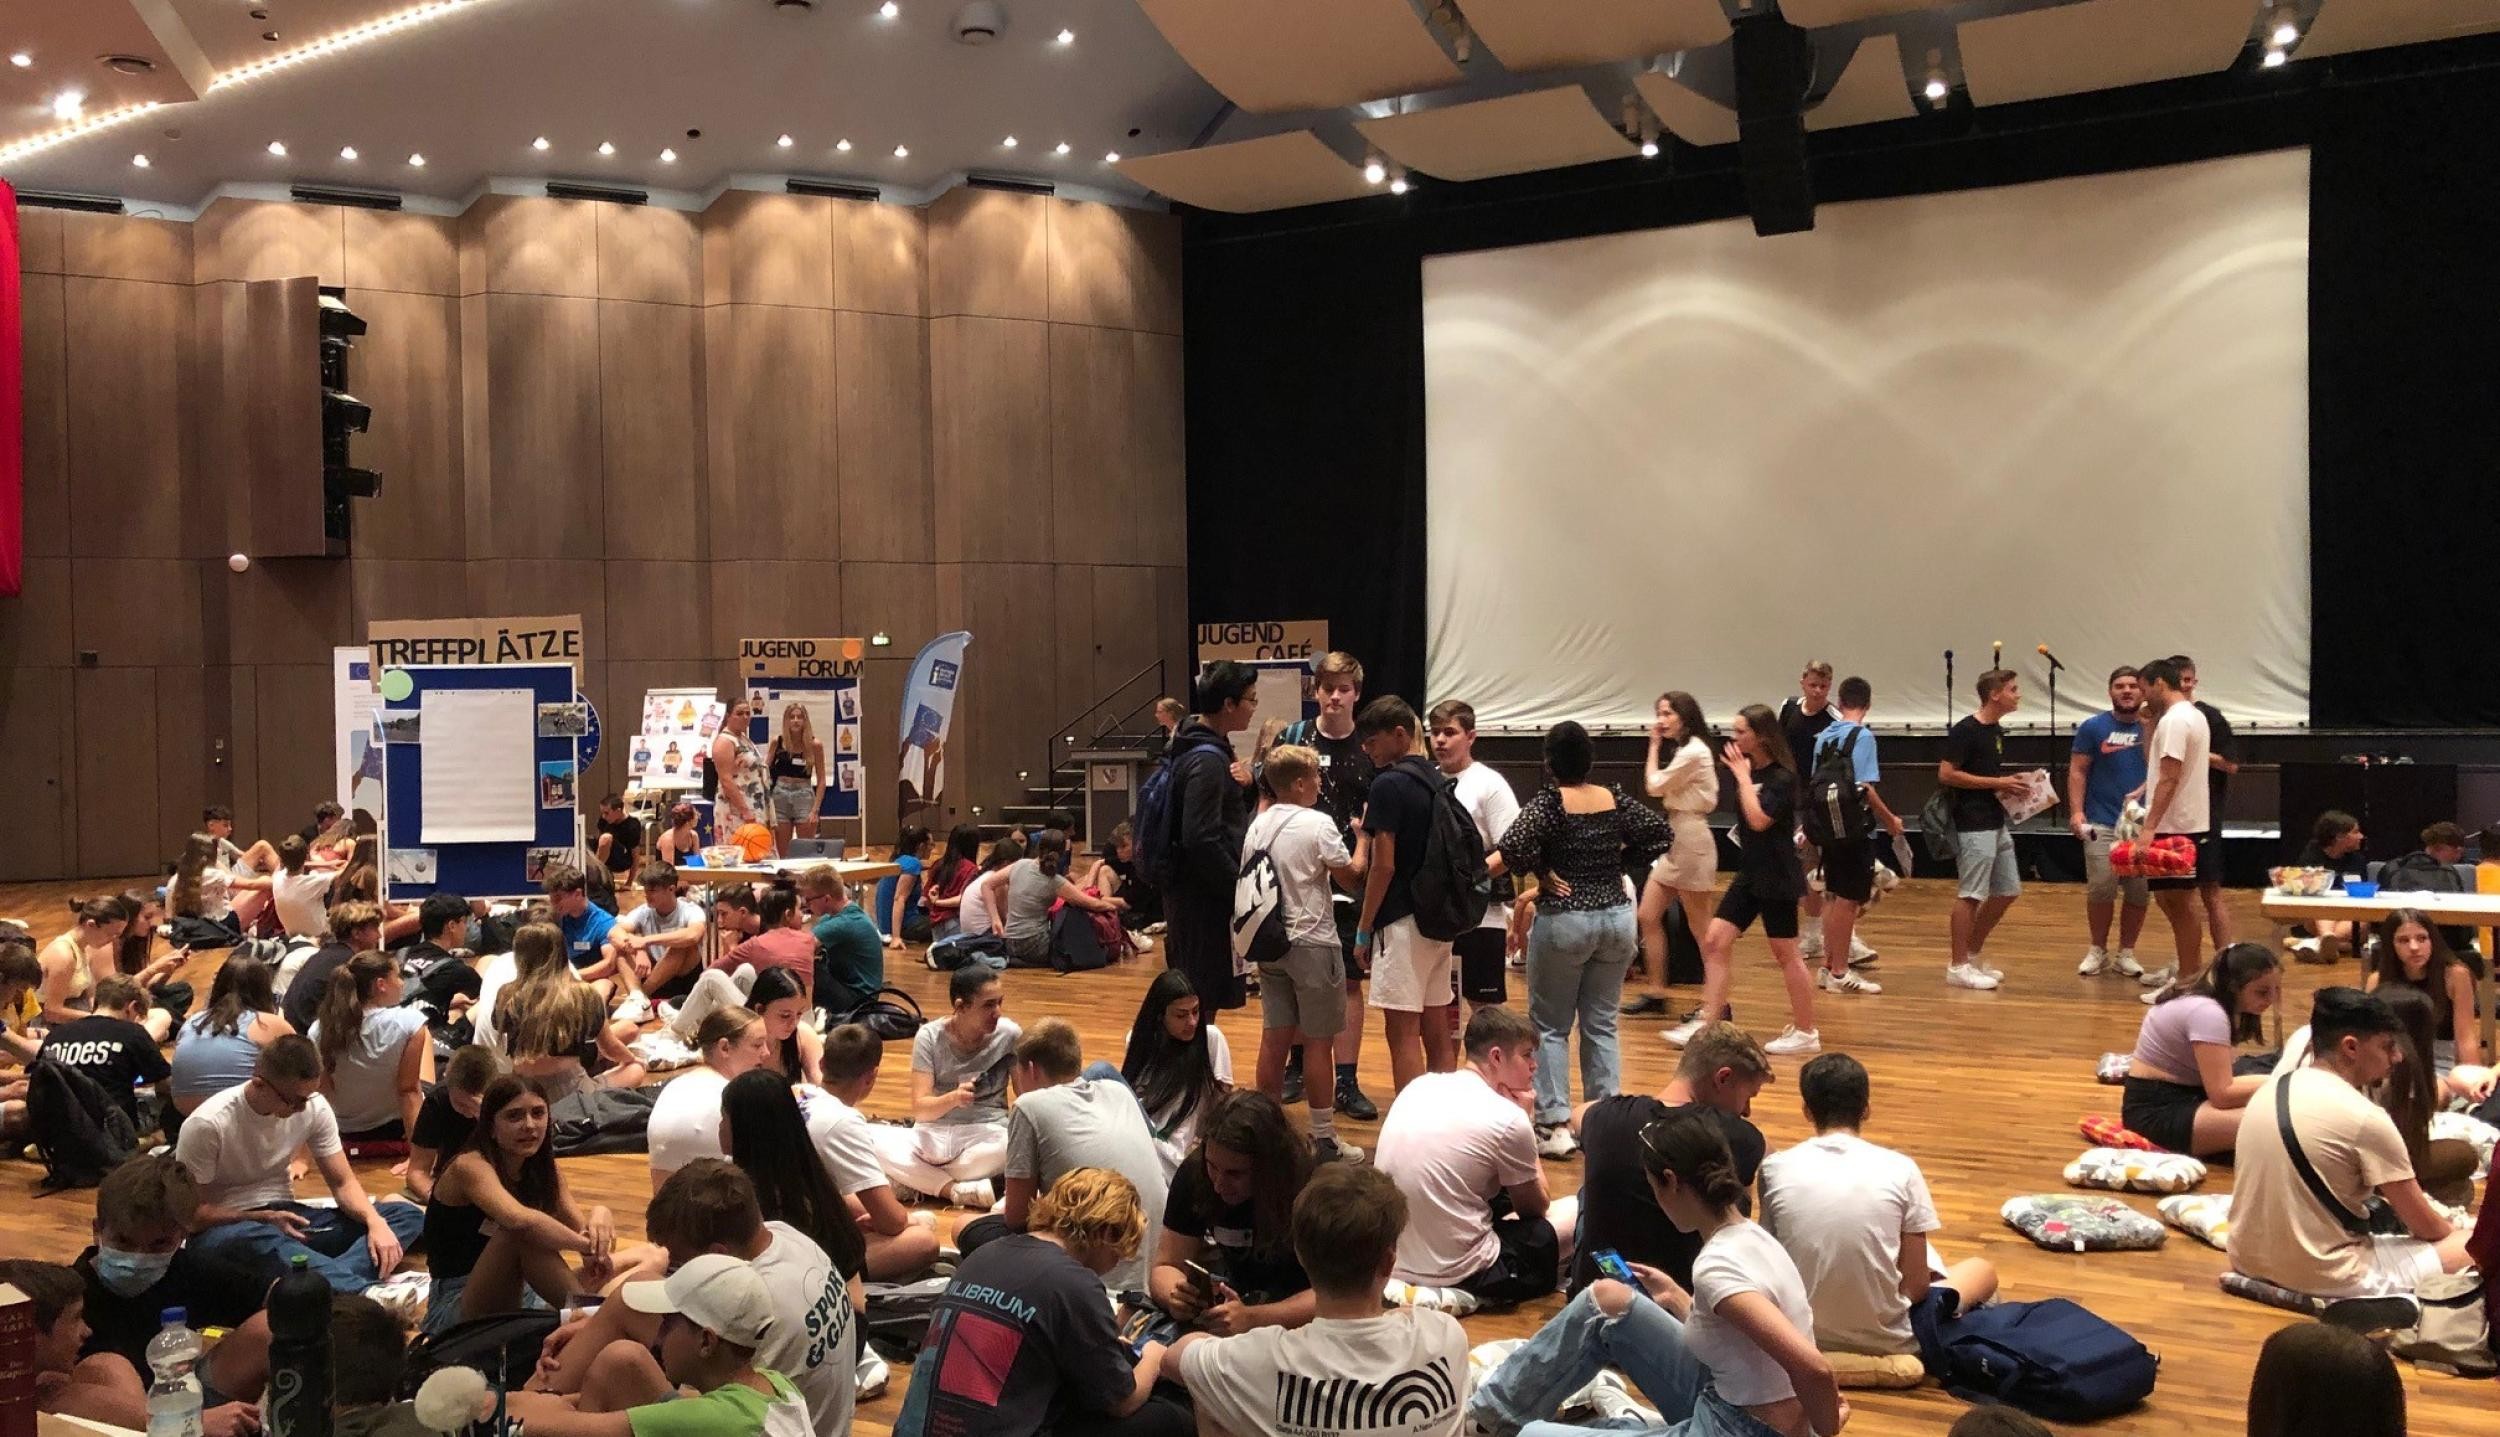 Many young people sit and stand in a large hall. There are info stands and a big screen in the background.